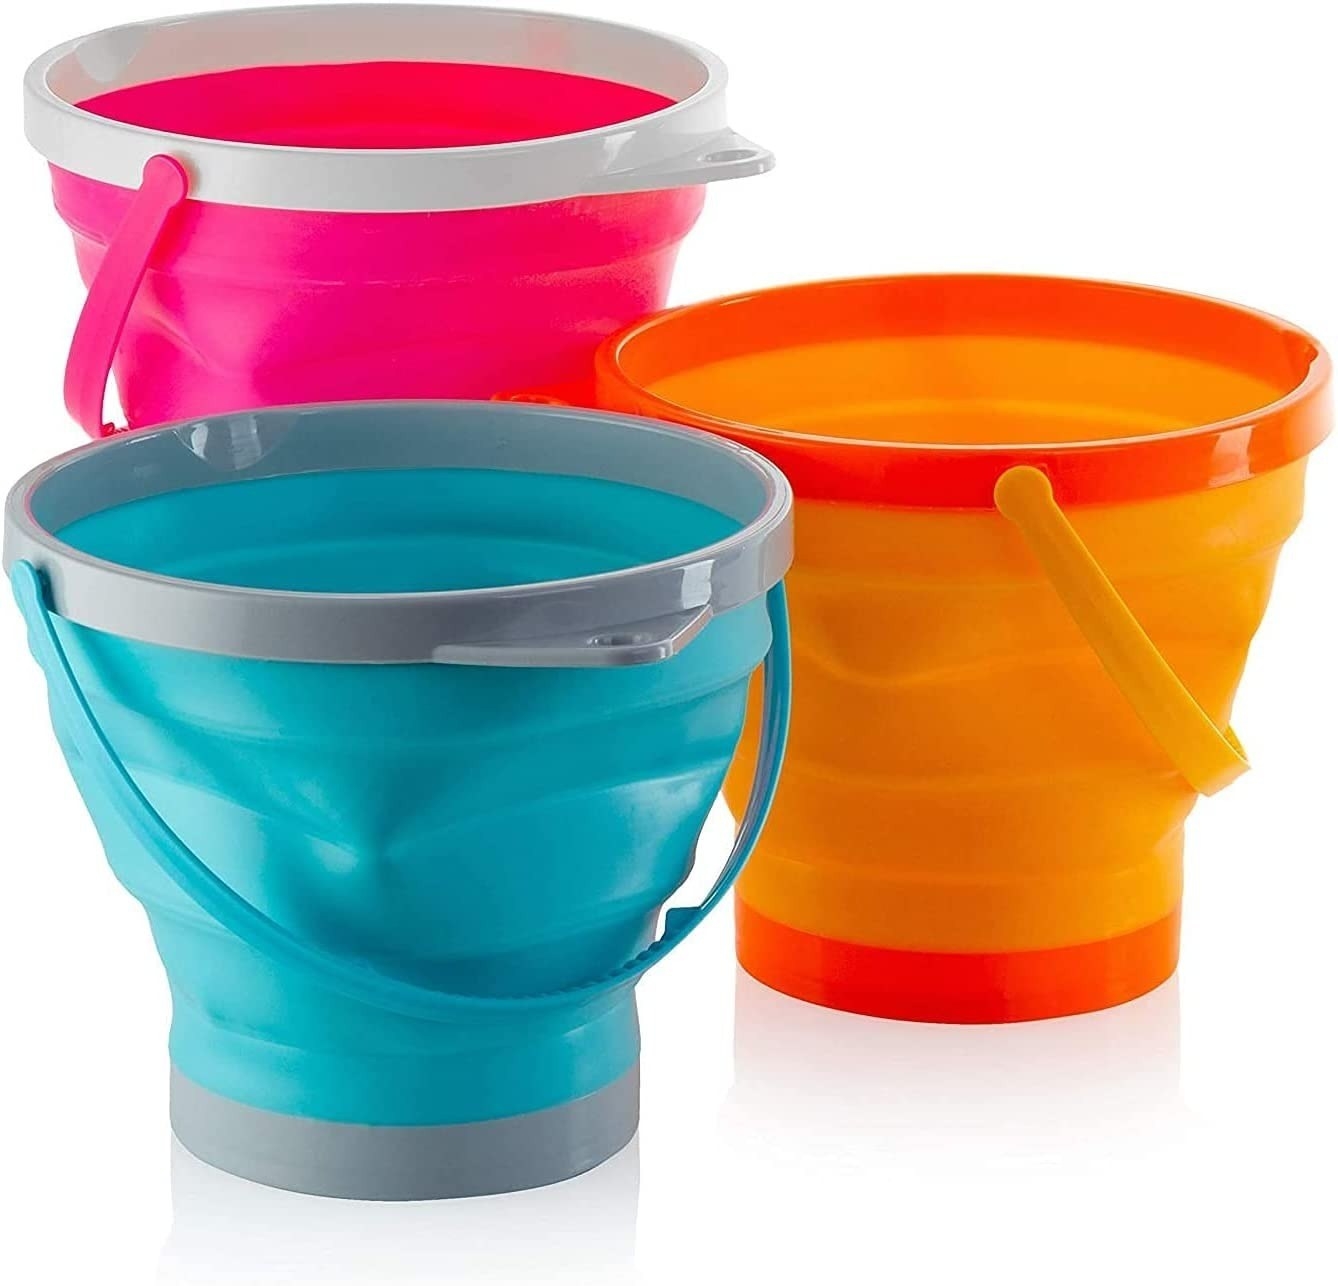 pink, blue, and orange collapsible buckets